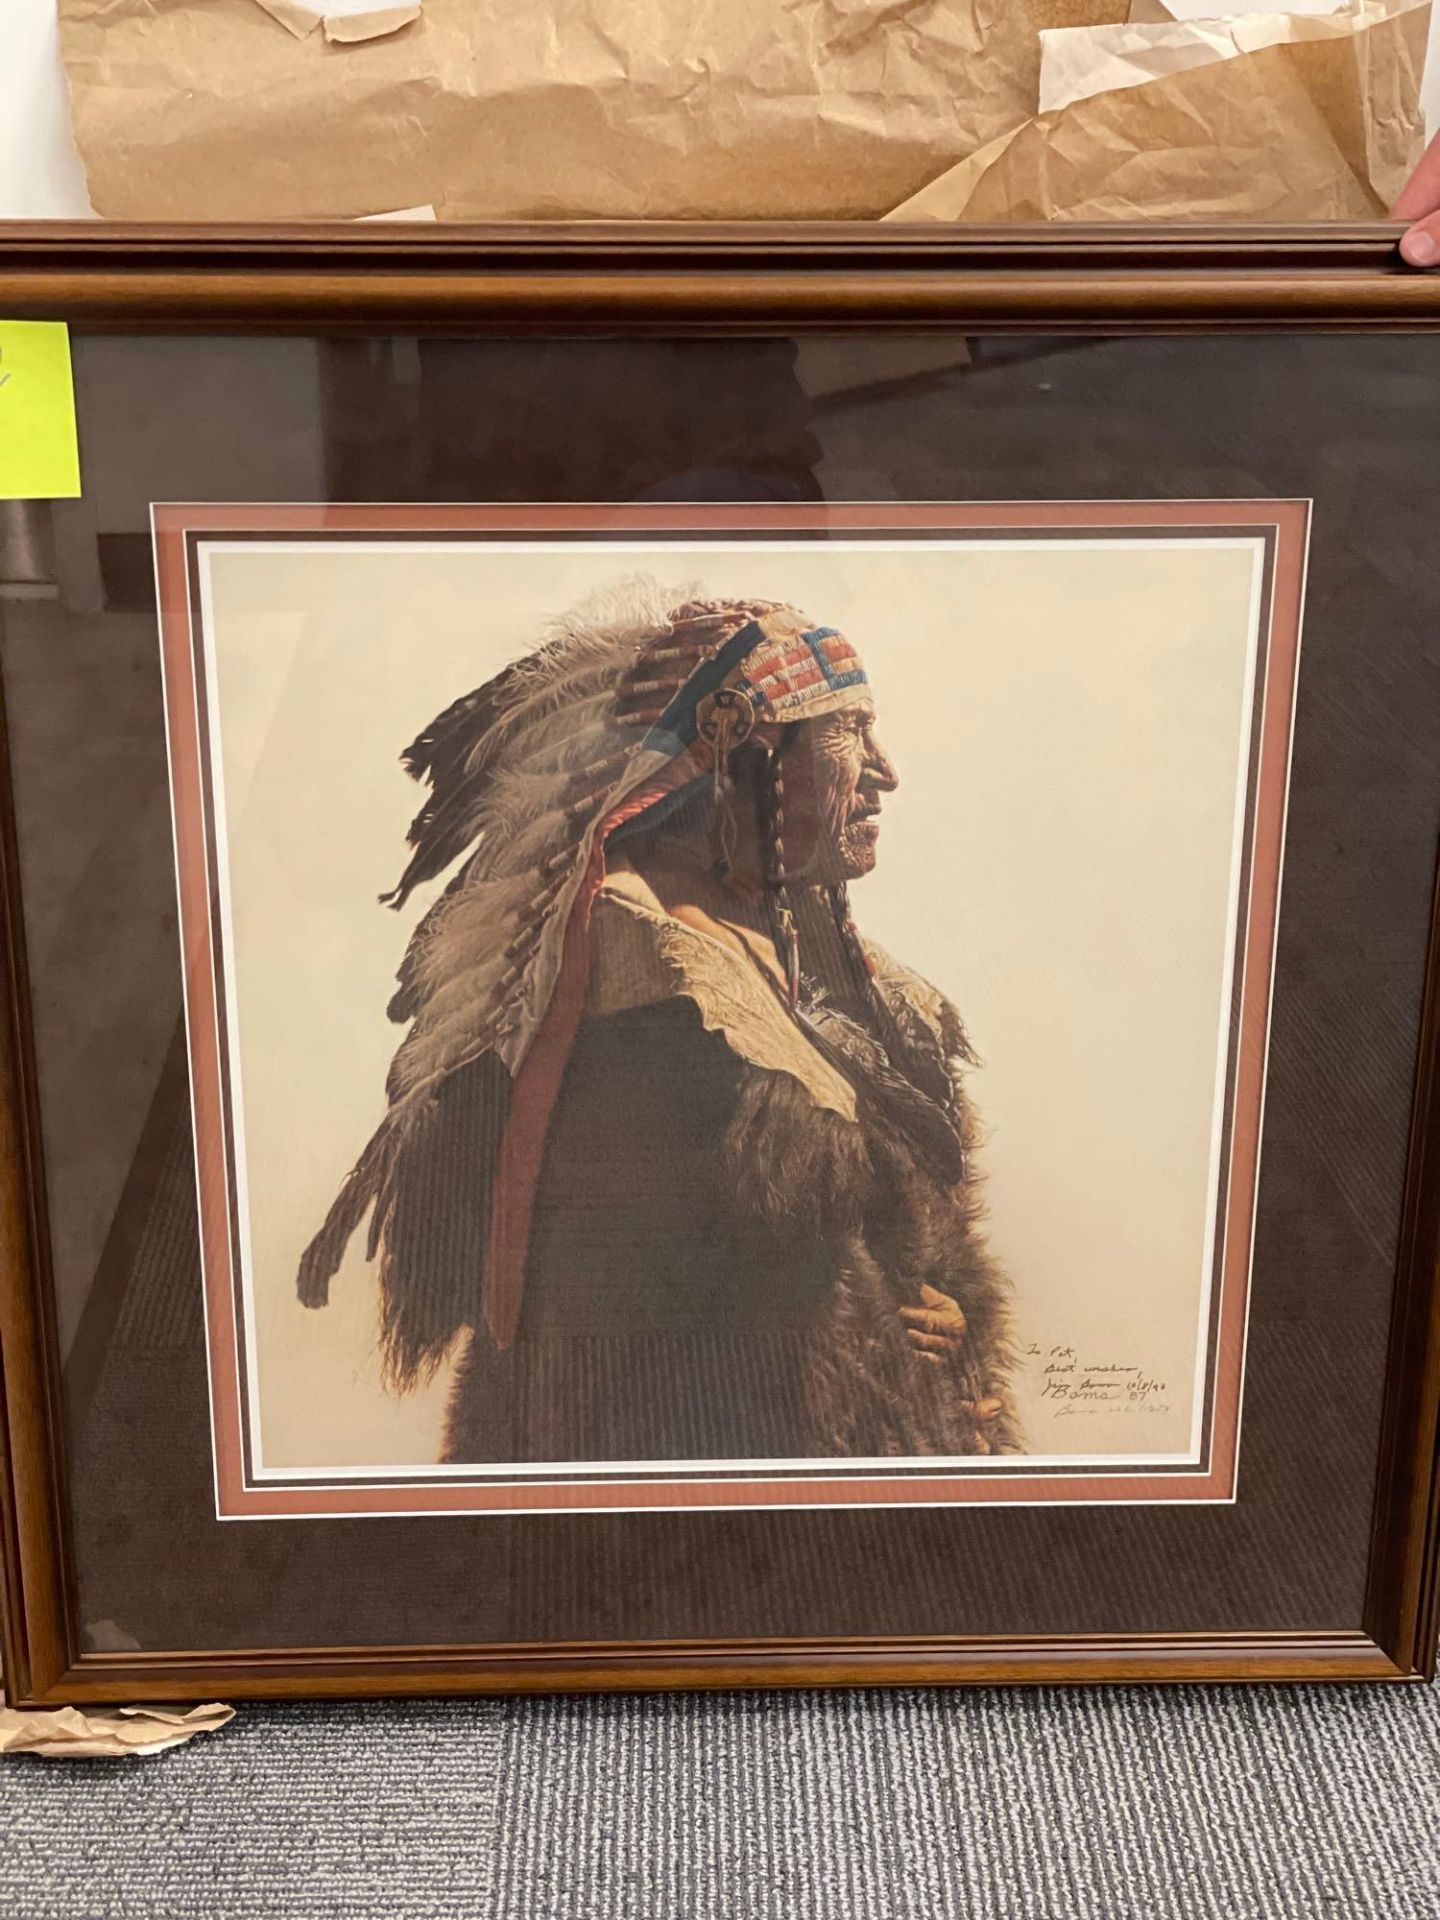 Art: James Bama "Crow Indian from Lodge Grass" 1 of 1250 Signed 2x - Image 2 of 5